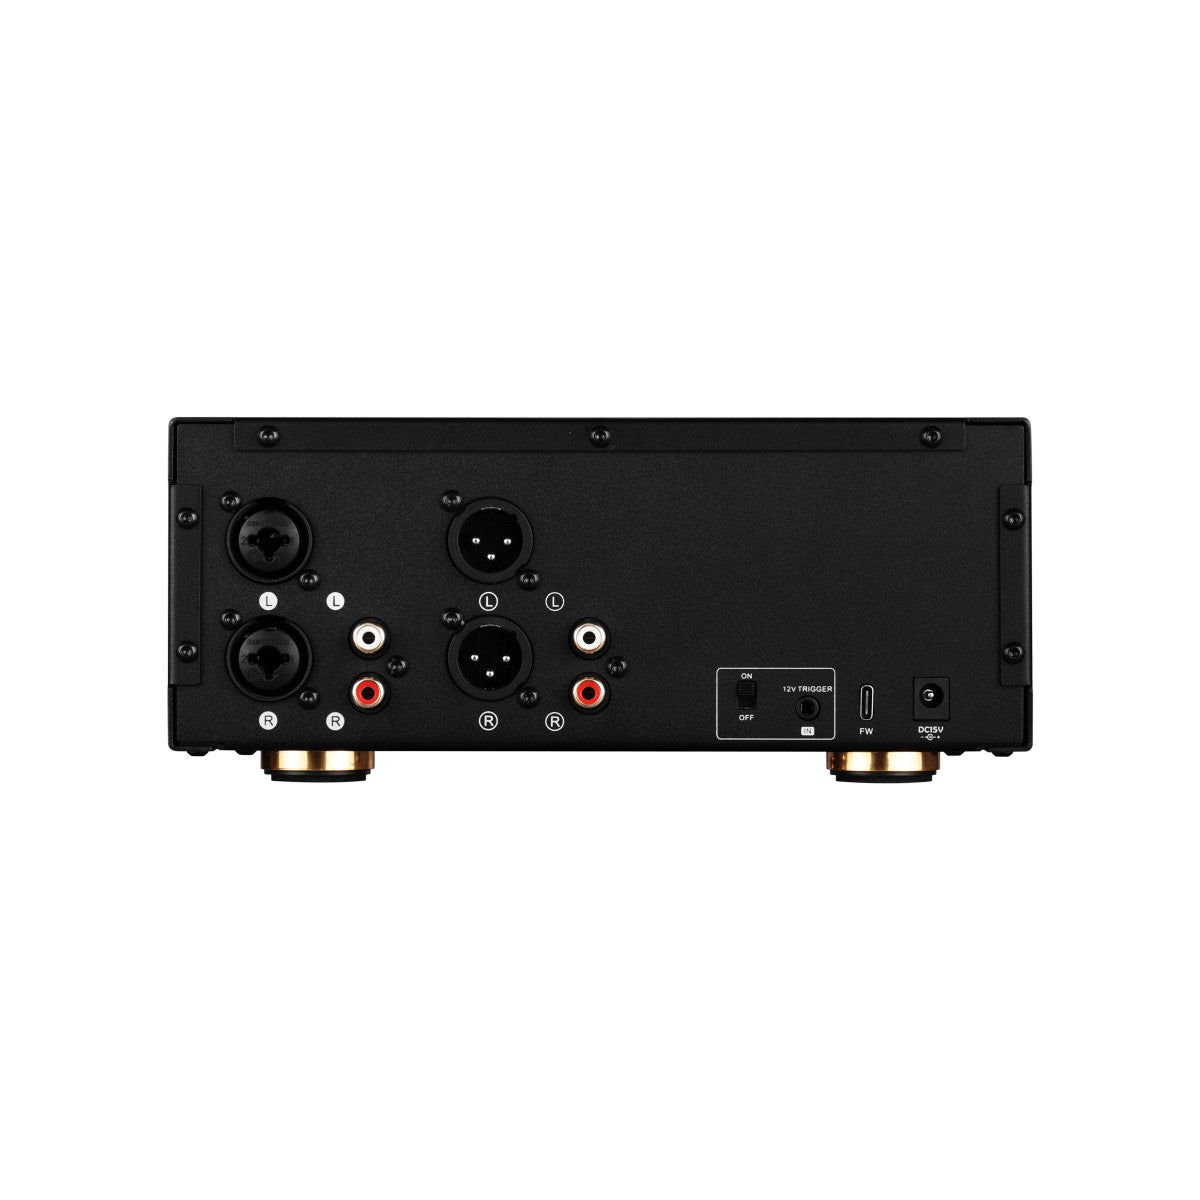 [5% off] Topping EHA5 Electrostatic Headphone Amplifier 700Vrms Output Level DC580V Bias Voltage